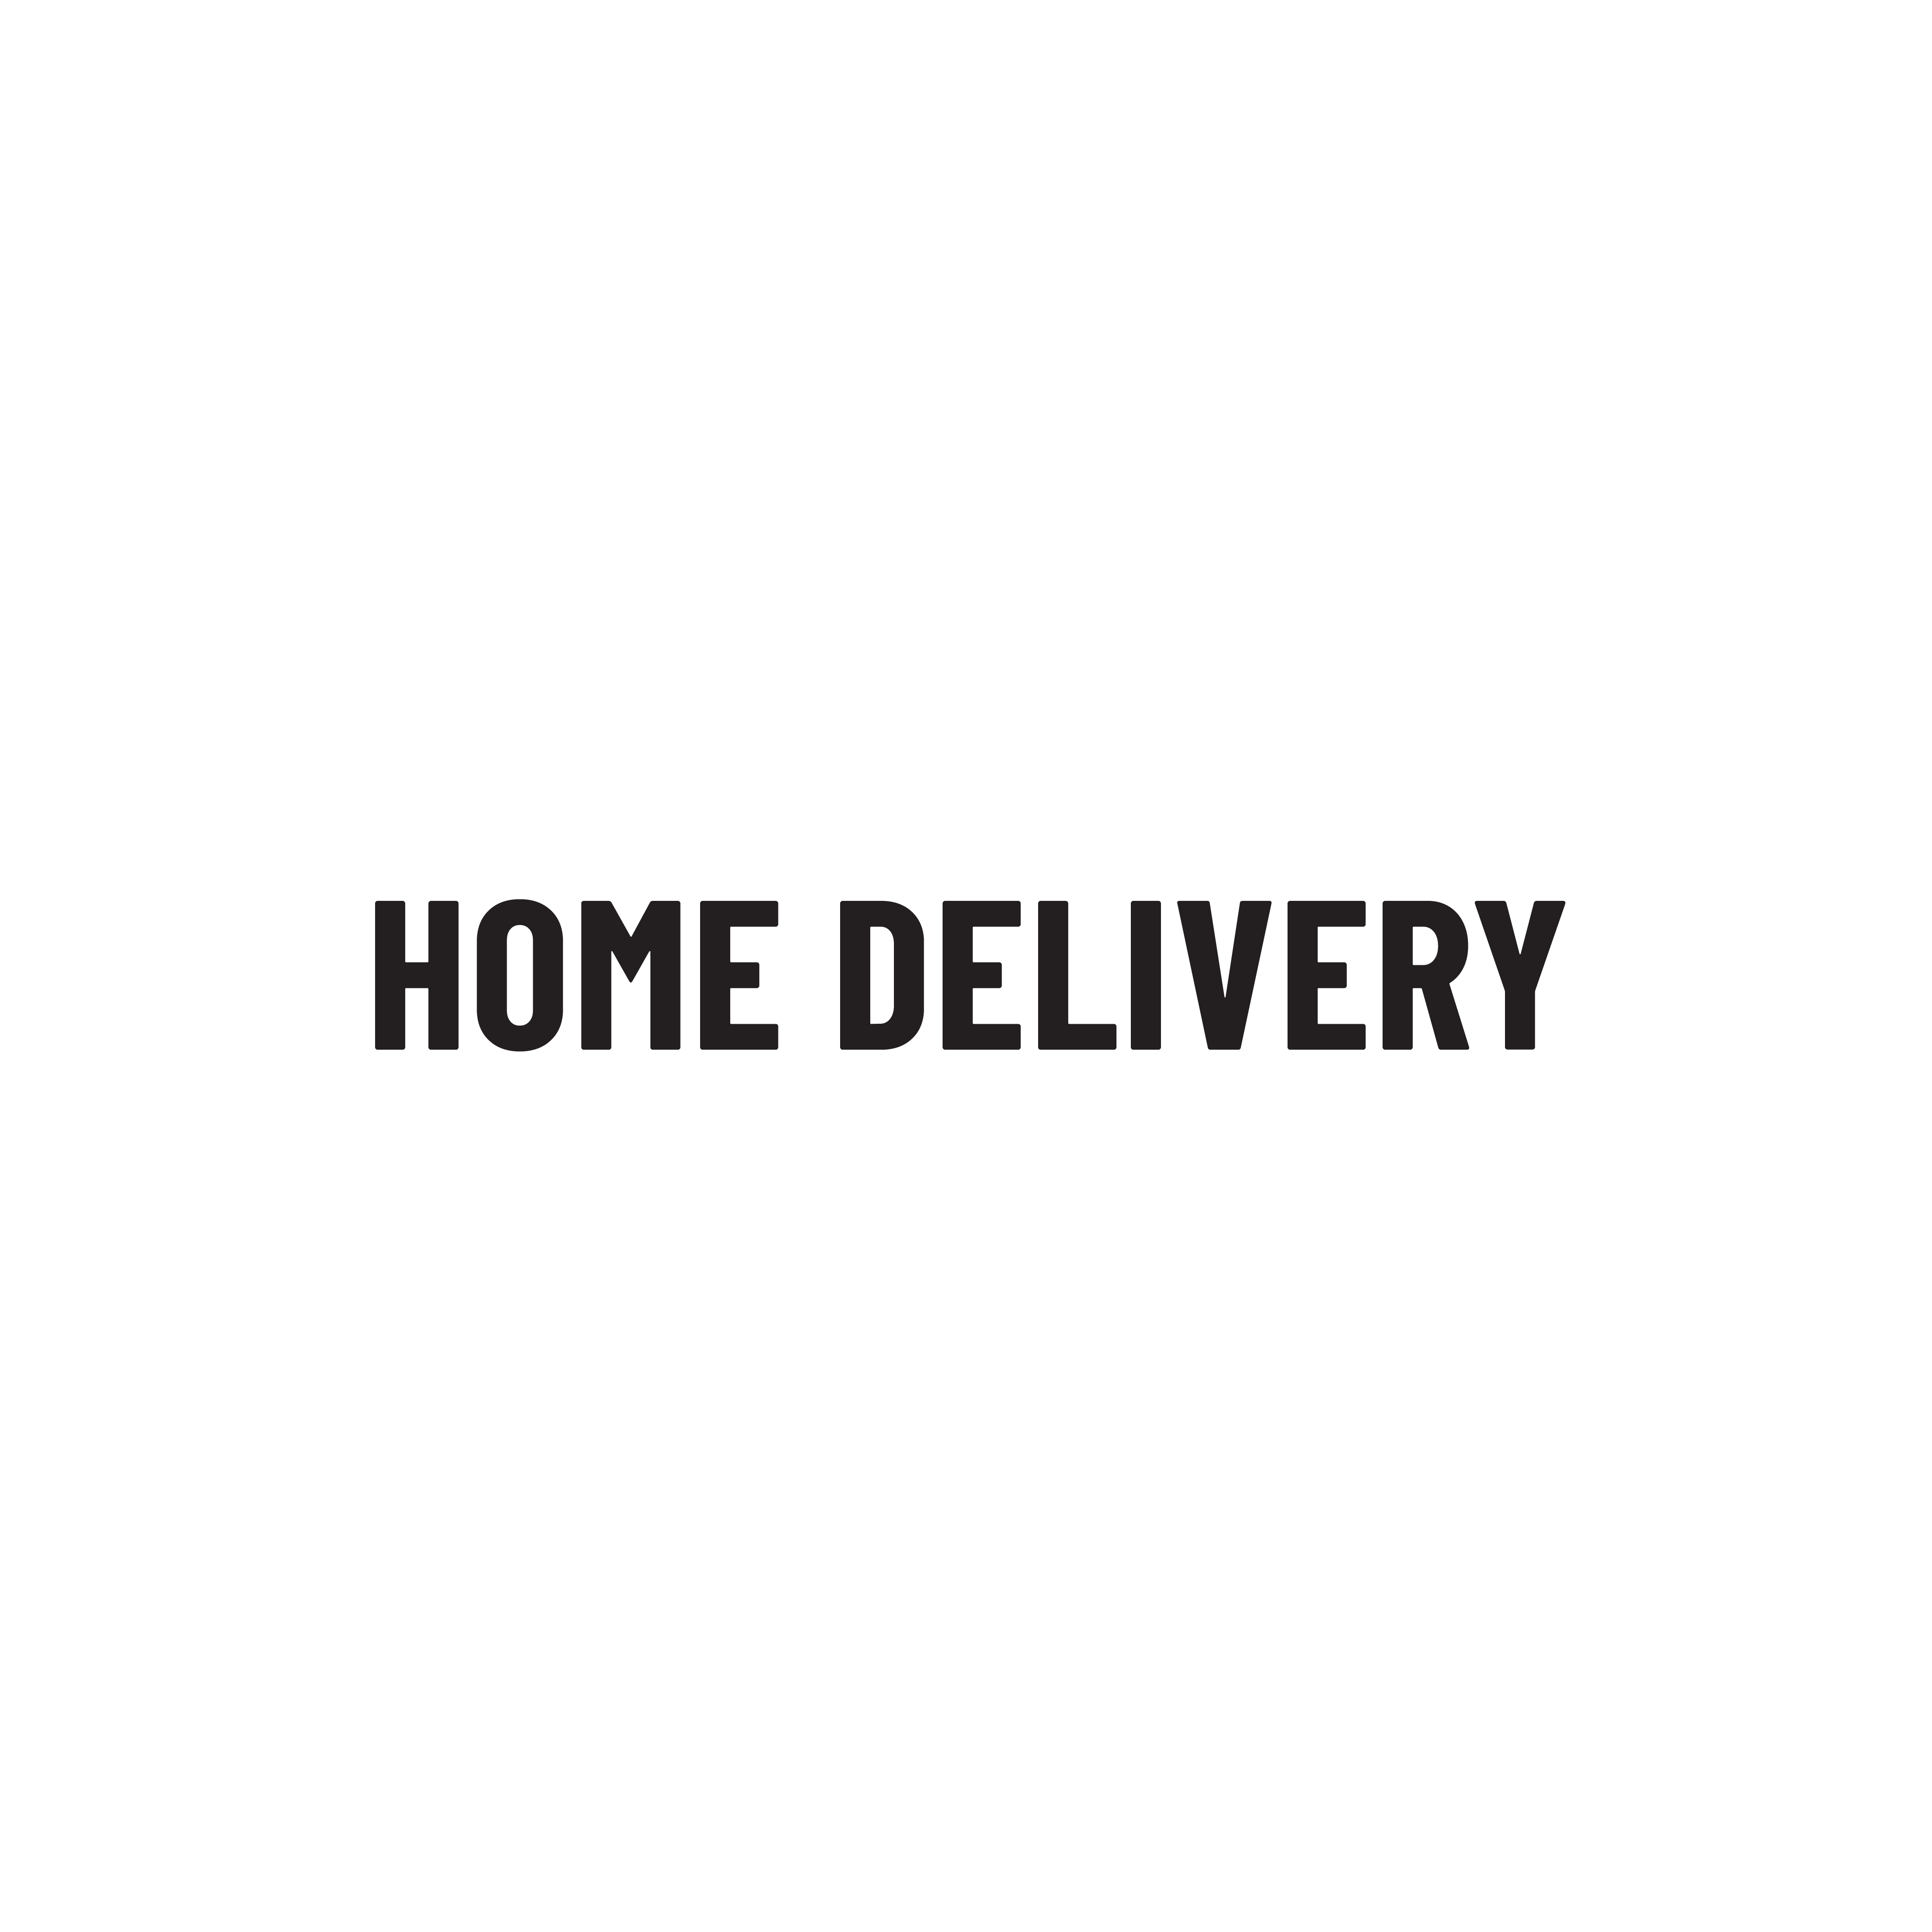 Home Delivery logo